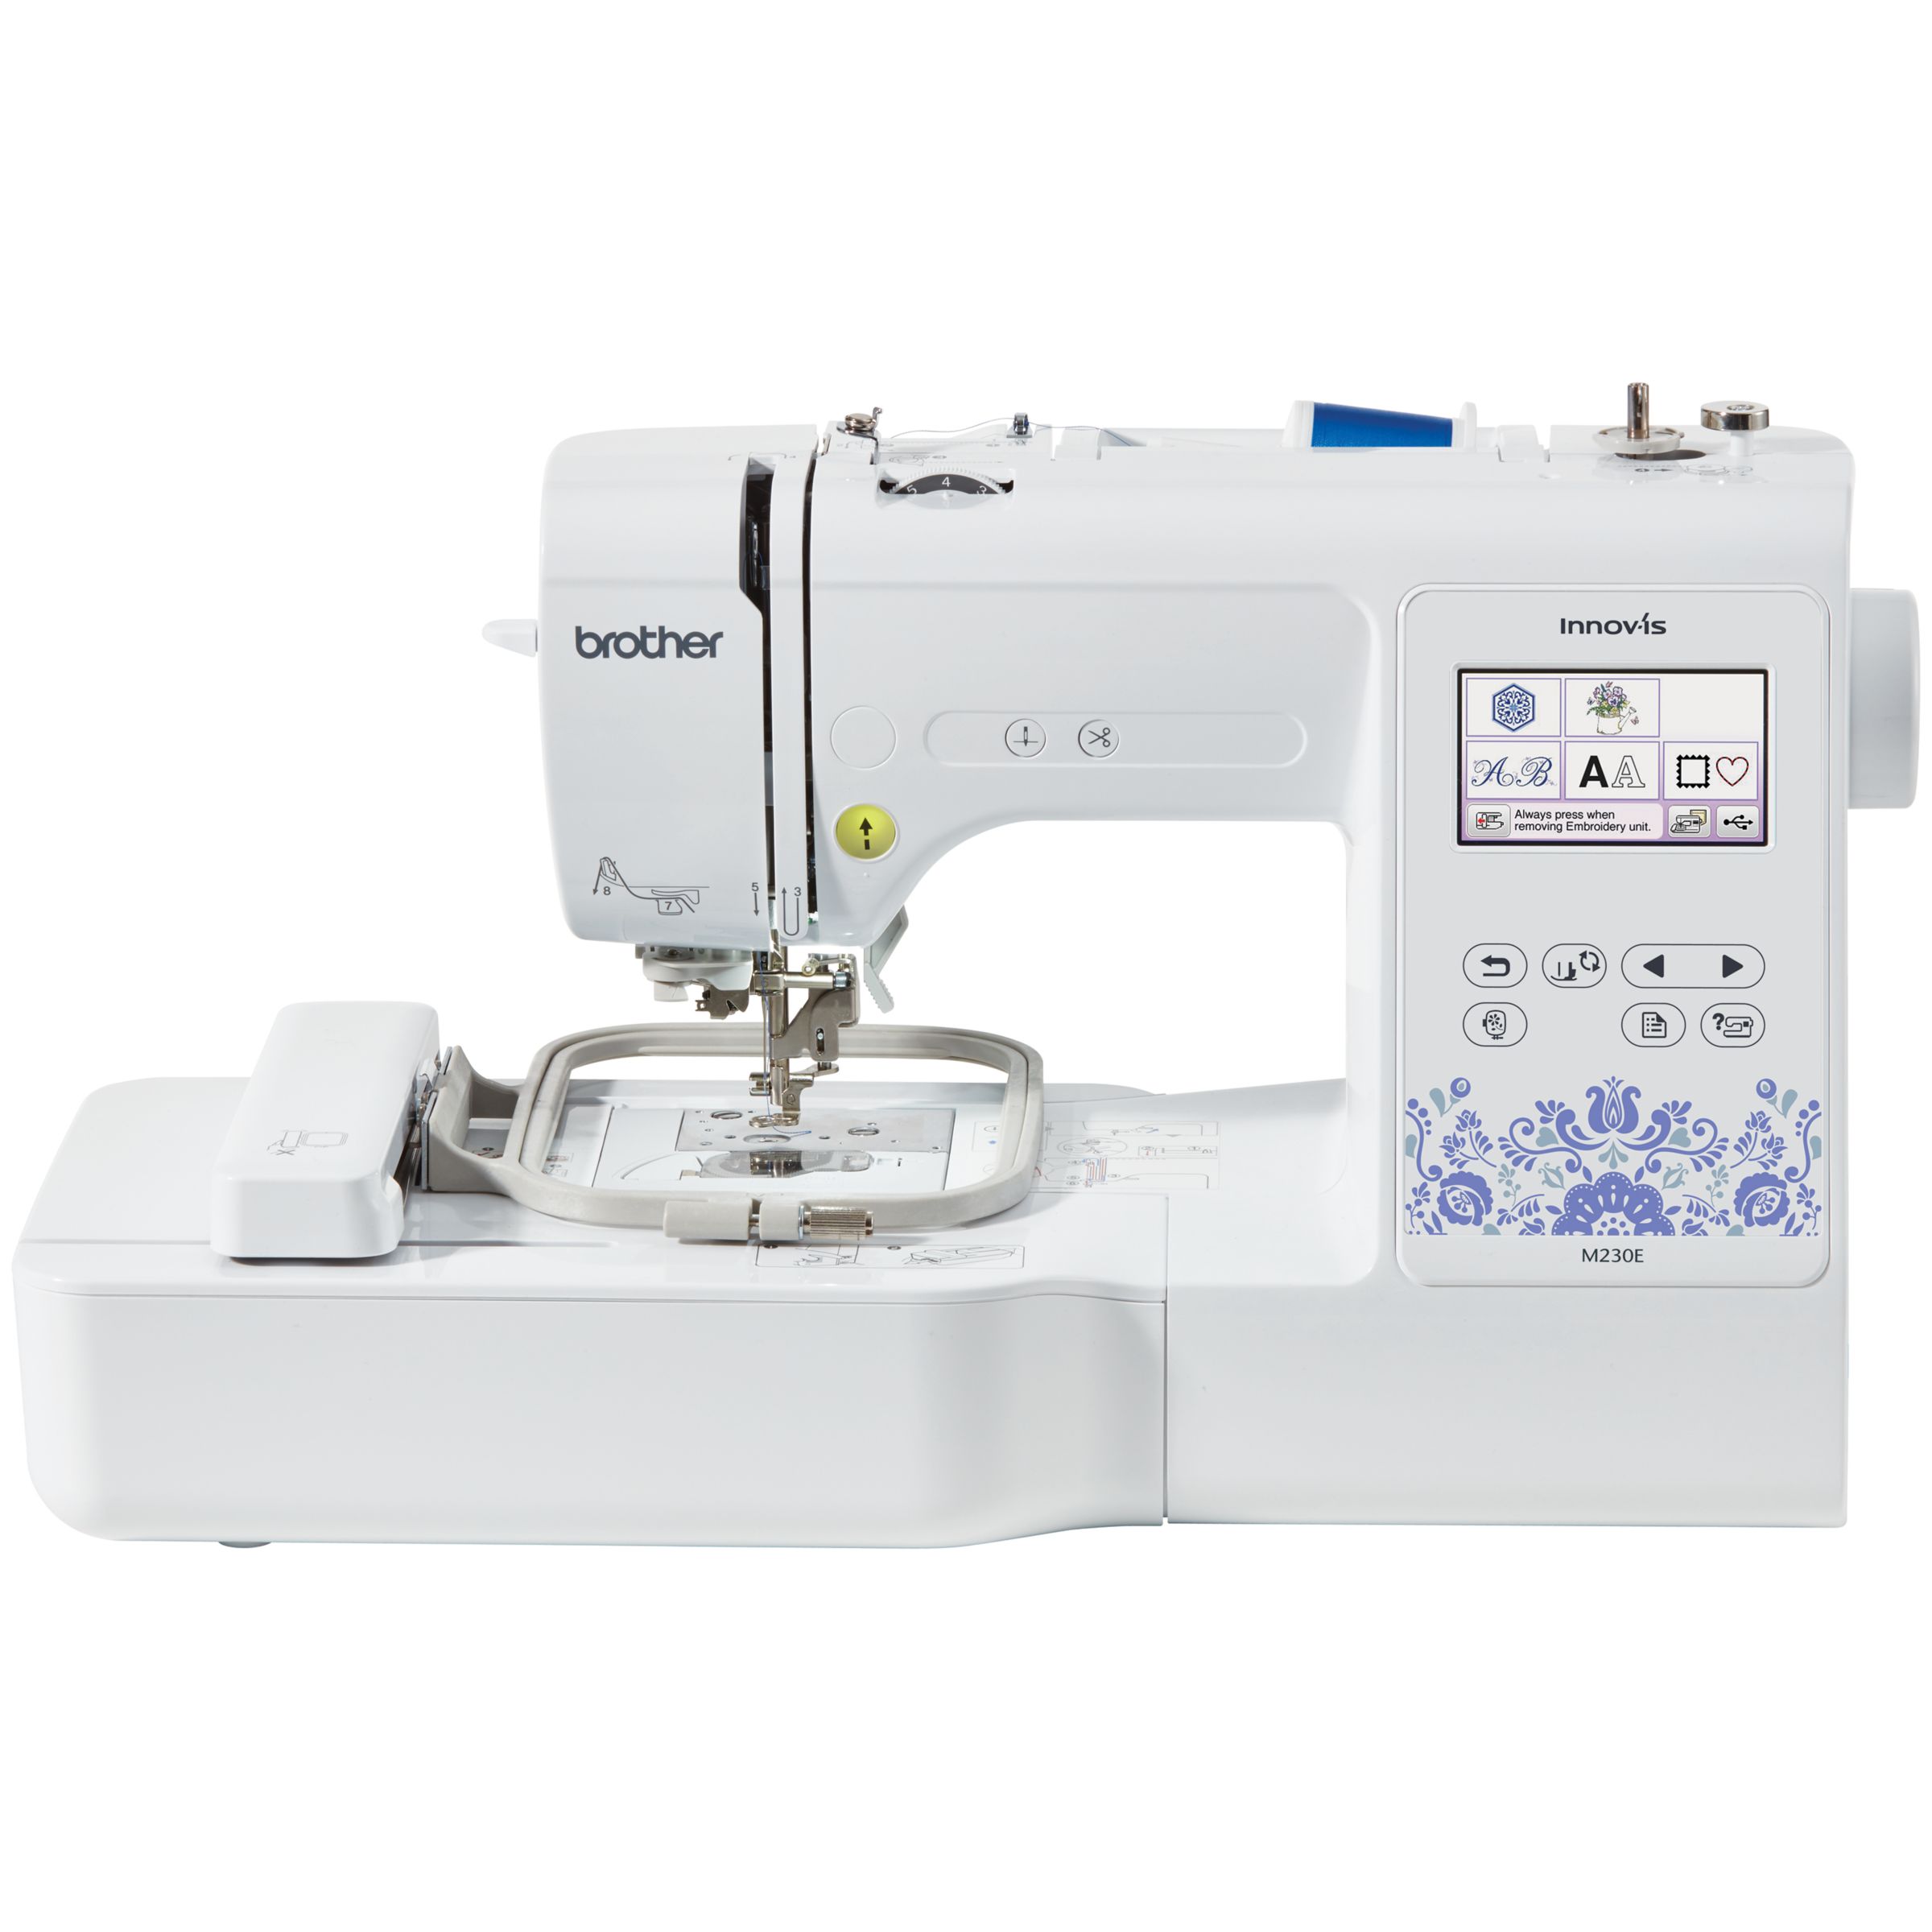 Brother Innov-Is M230e Embroidery Machine, White at John Lewis & Partners